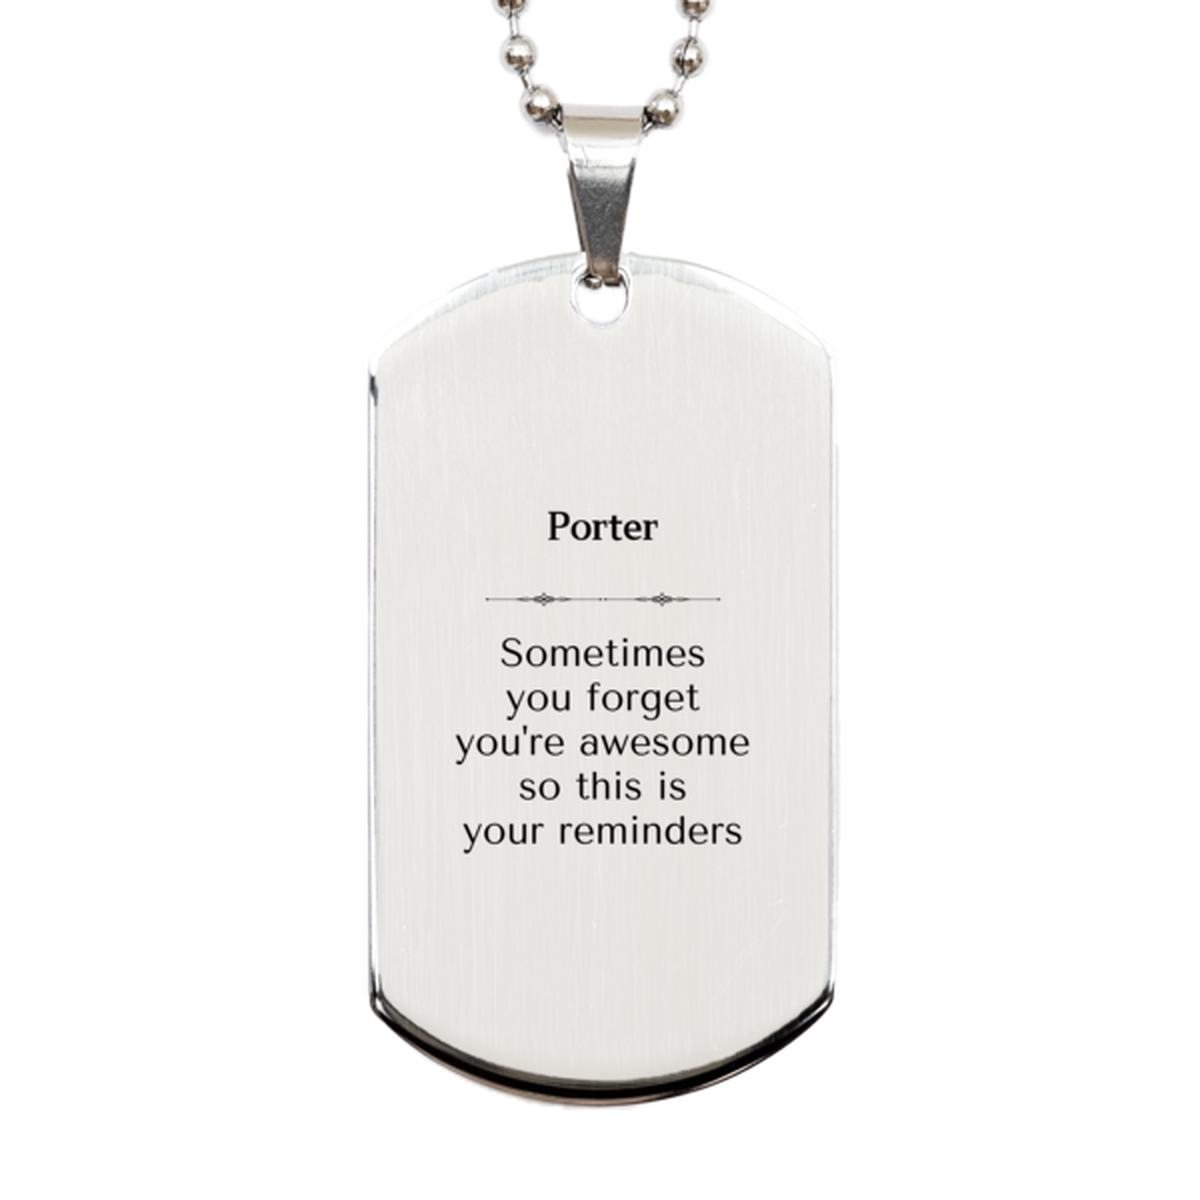 Sentimental Porter Silver Dog Tag, Porter Sometimes you forget you're awesome so this is your reminders, Graduation Christmas Birthday Gifts for Porter, Men, Women, Coworkers